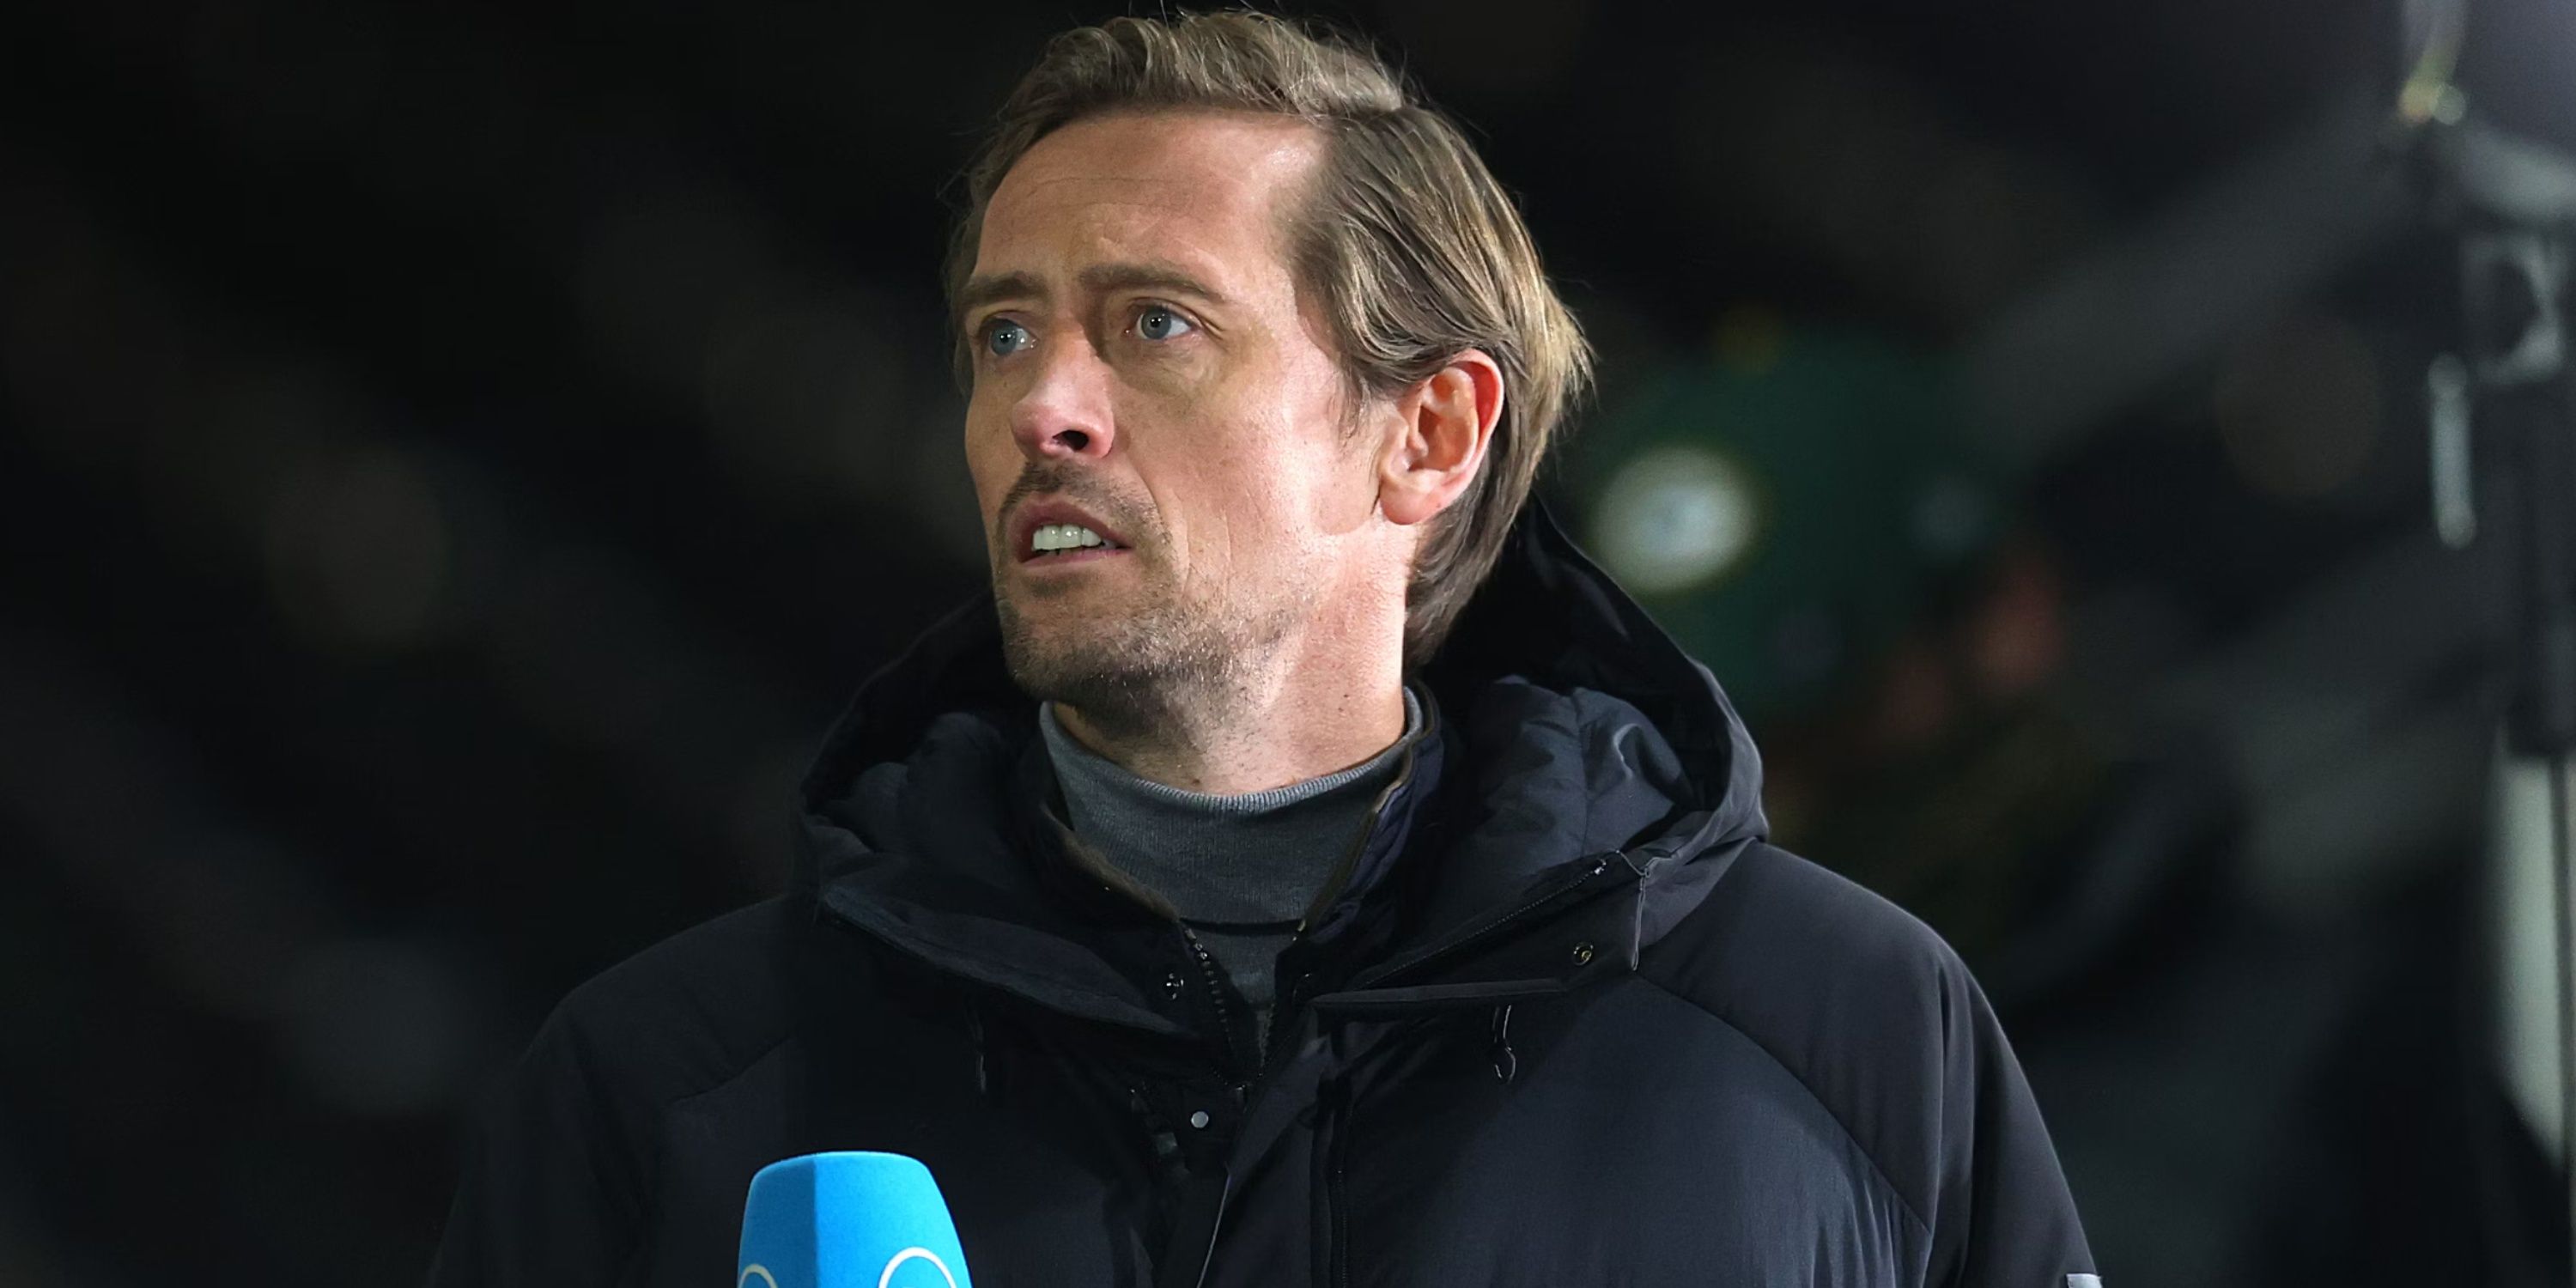 Dirtiest footballer ever? Peter Crouch named the one player who scared him